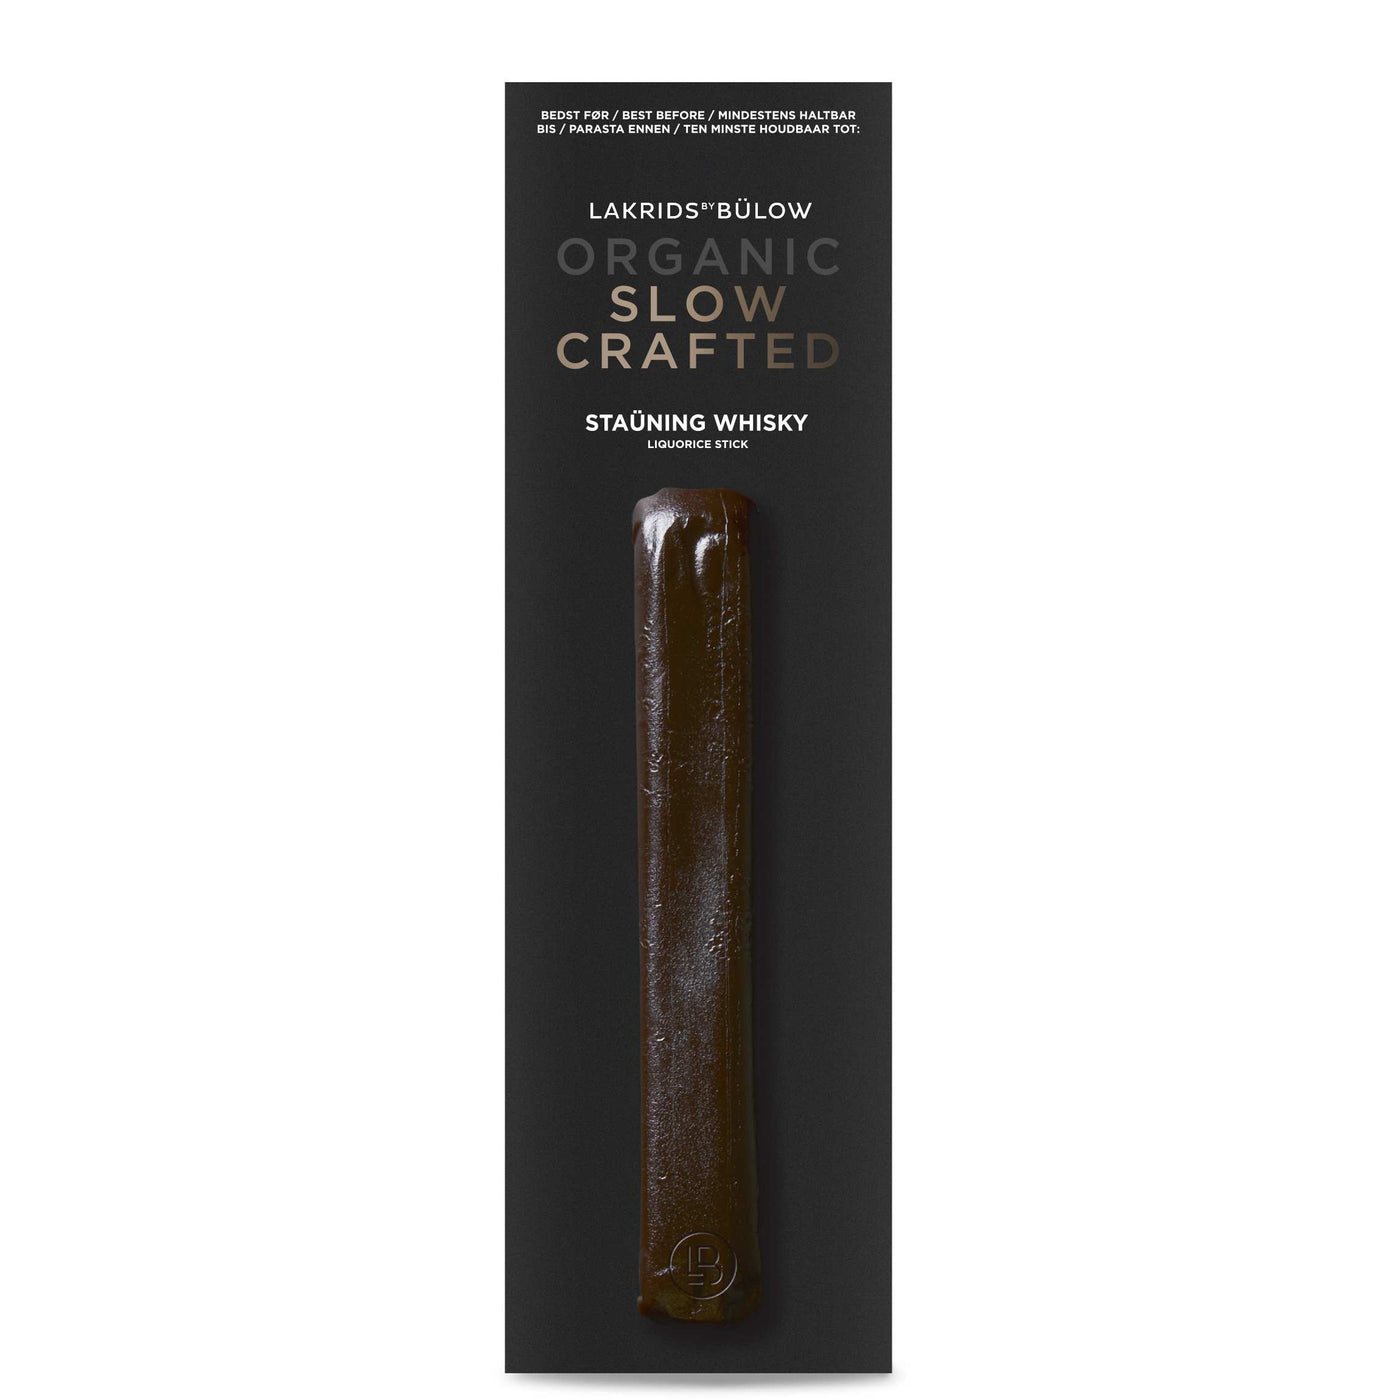 Lakrids Stauning Whisky - Slow Cooked Organic Sweet Liquorice Stick with Whisky